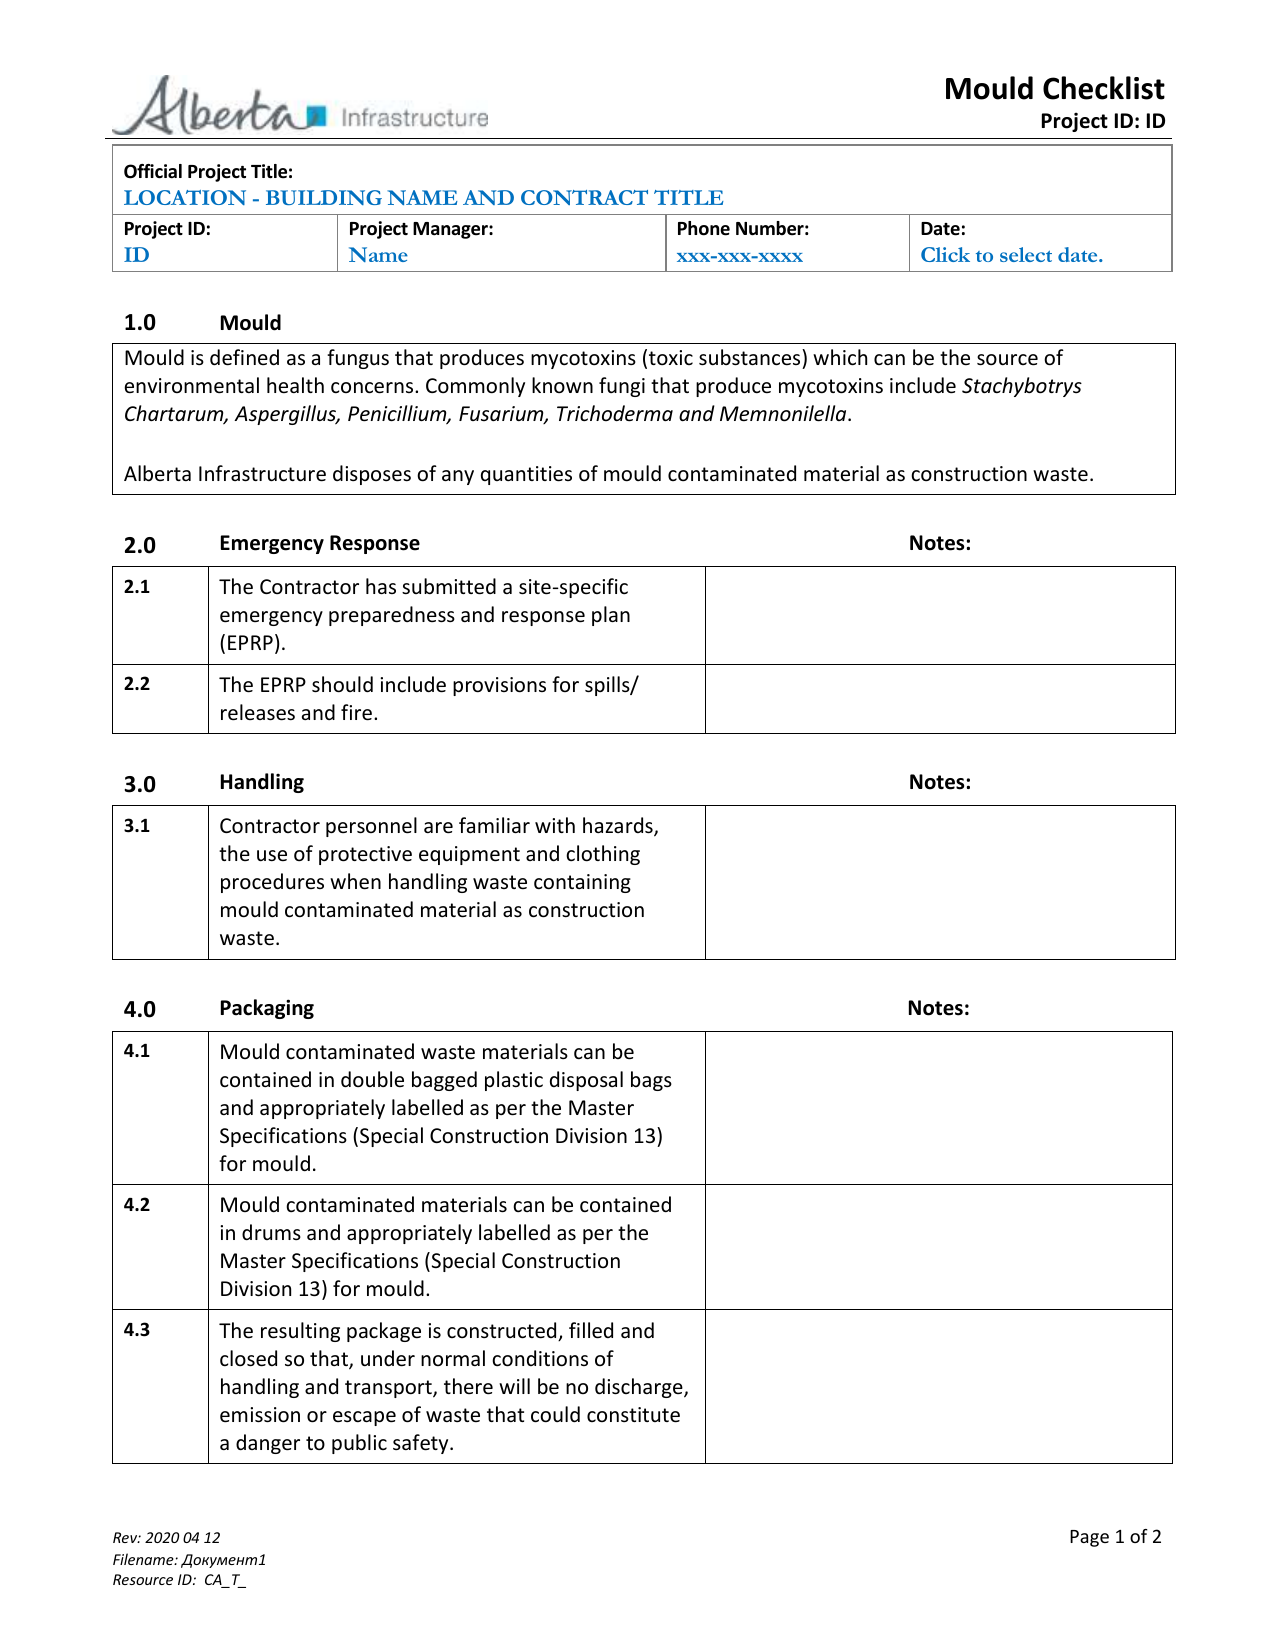 EMS Mould Checklist Template Alberta Ministry Of Infrastructure